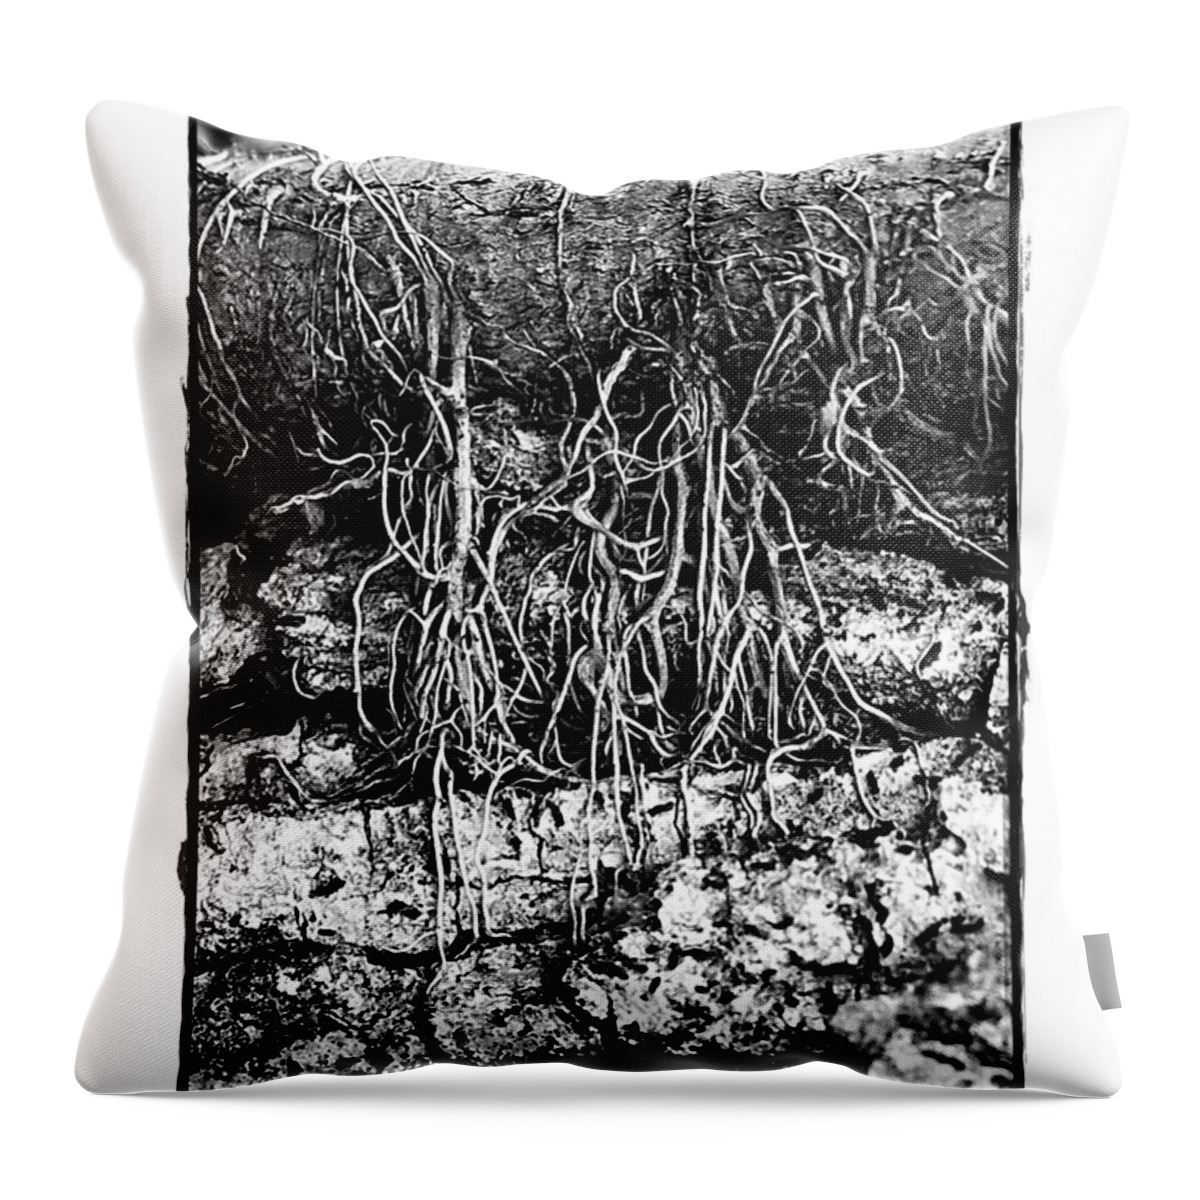 Monotone Throw Pillow featuring the photograph Poison Ivy Roots by Judi Bagwell